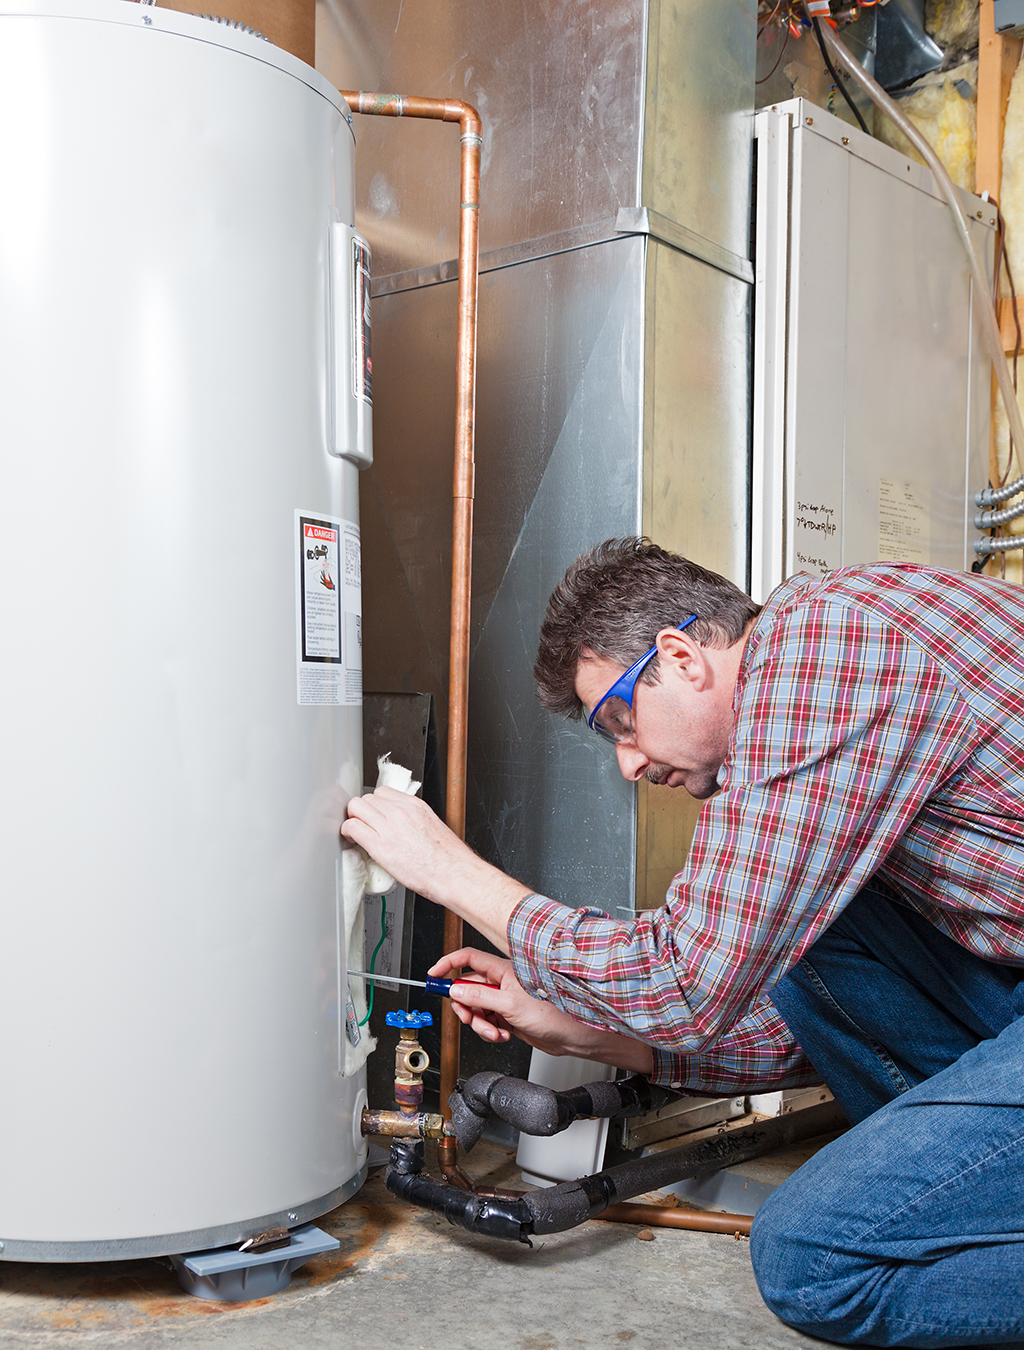 Water Heater Repair Is Complicated, Dangerous, And Difficult, So Leave It To The Pros | Boerne, TX